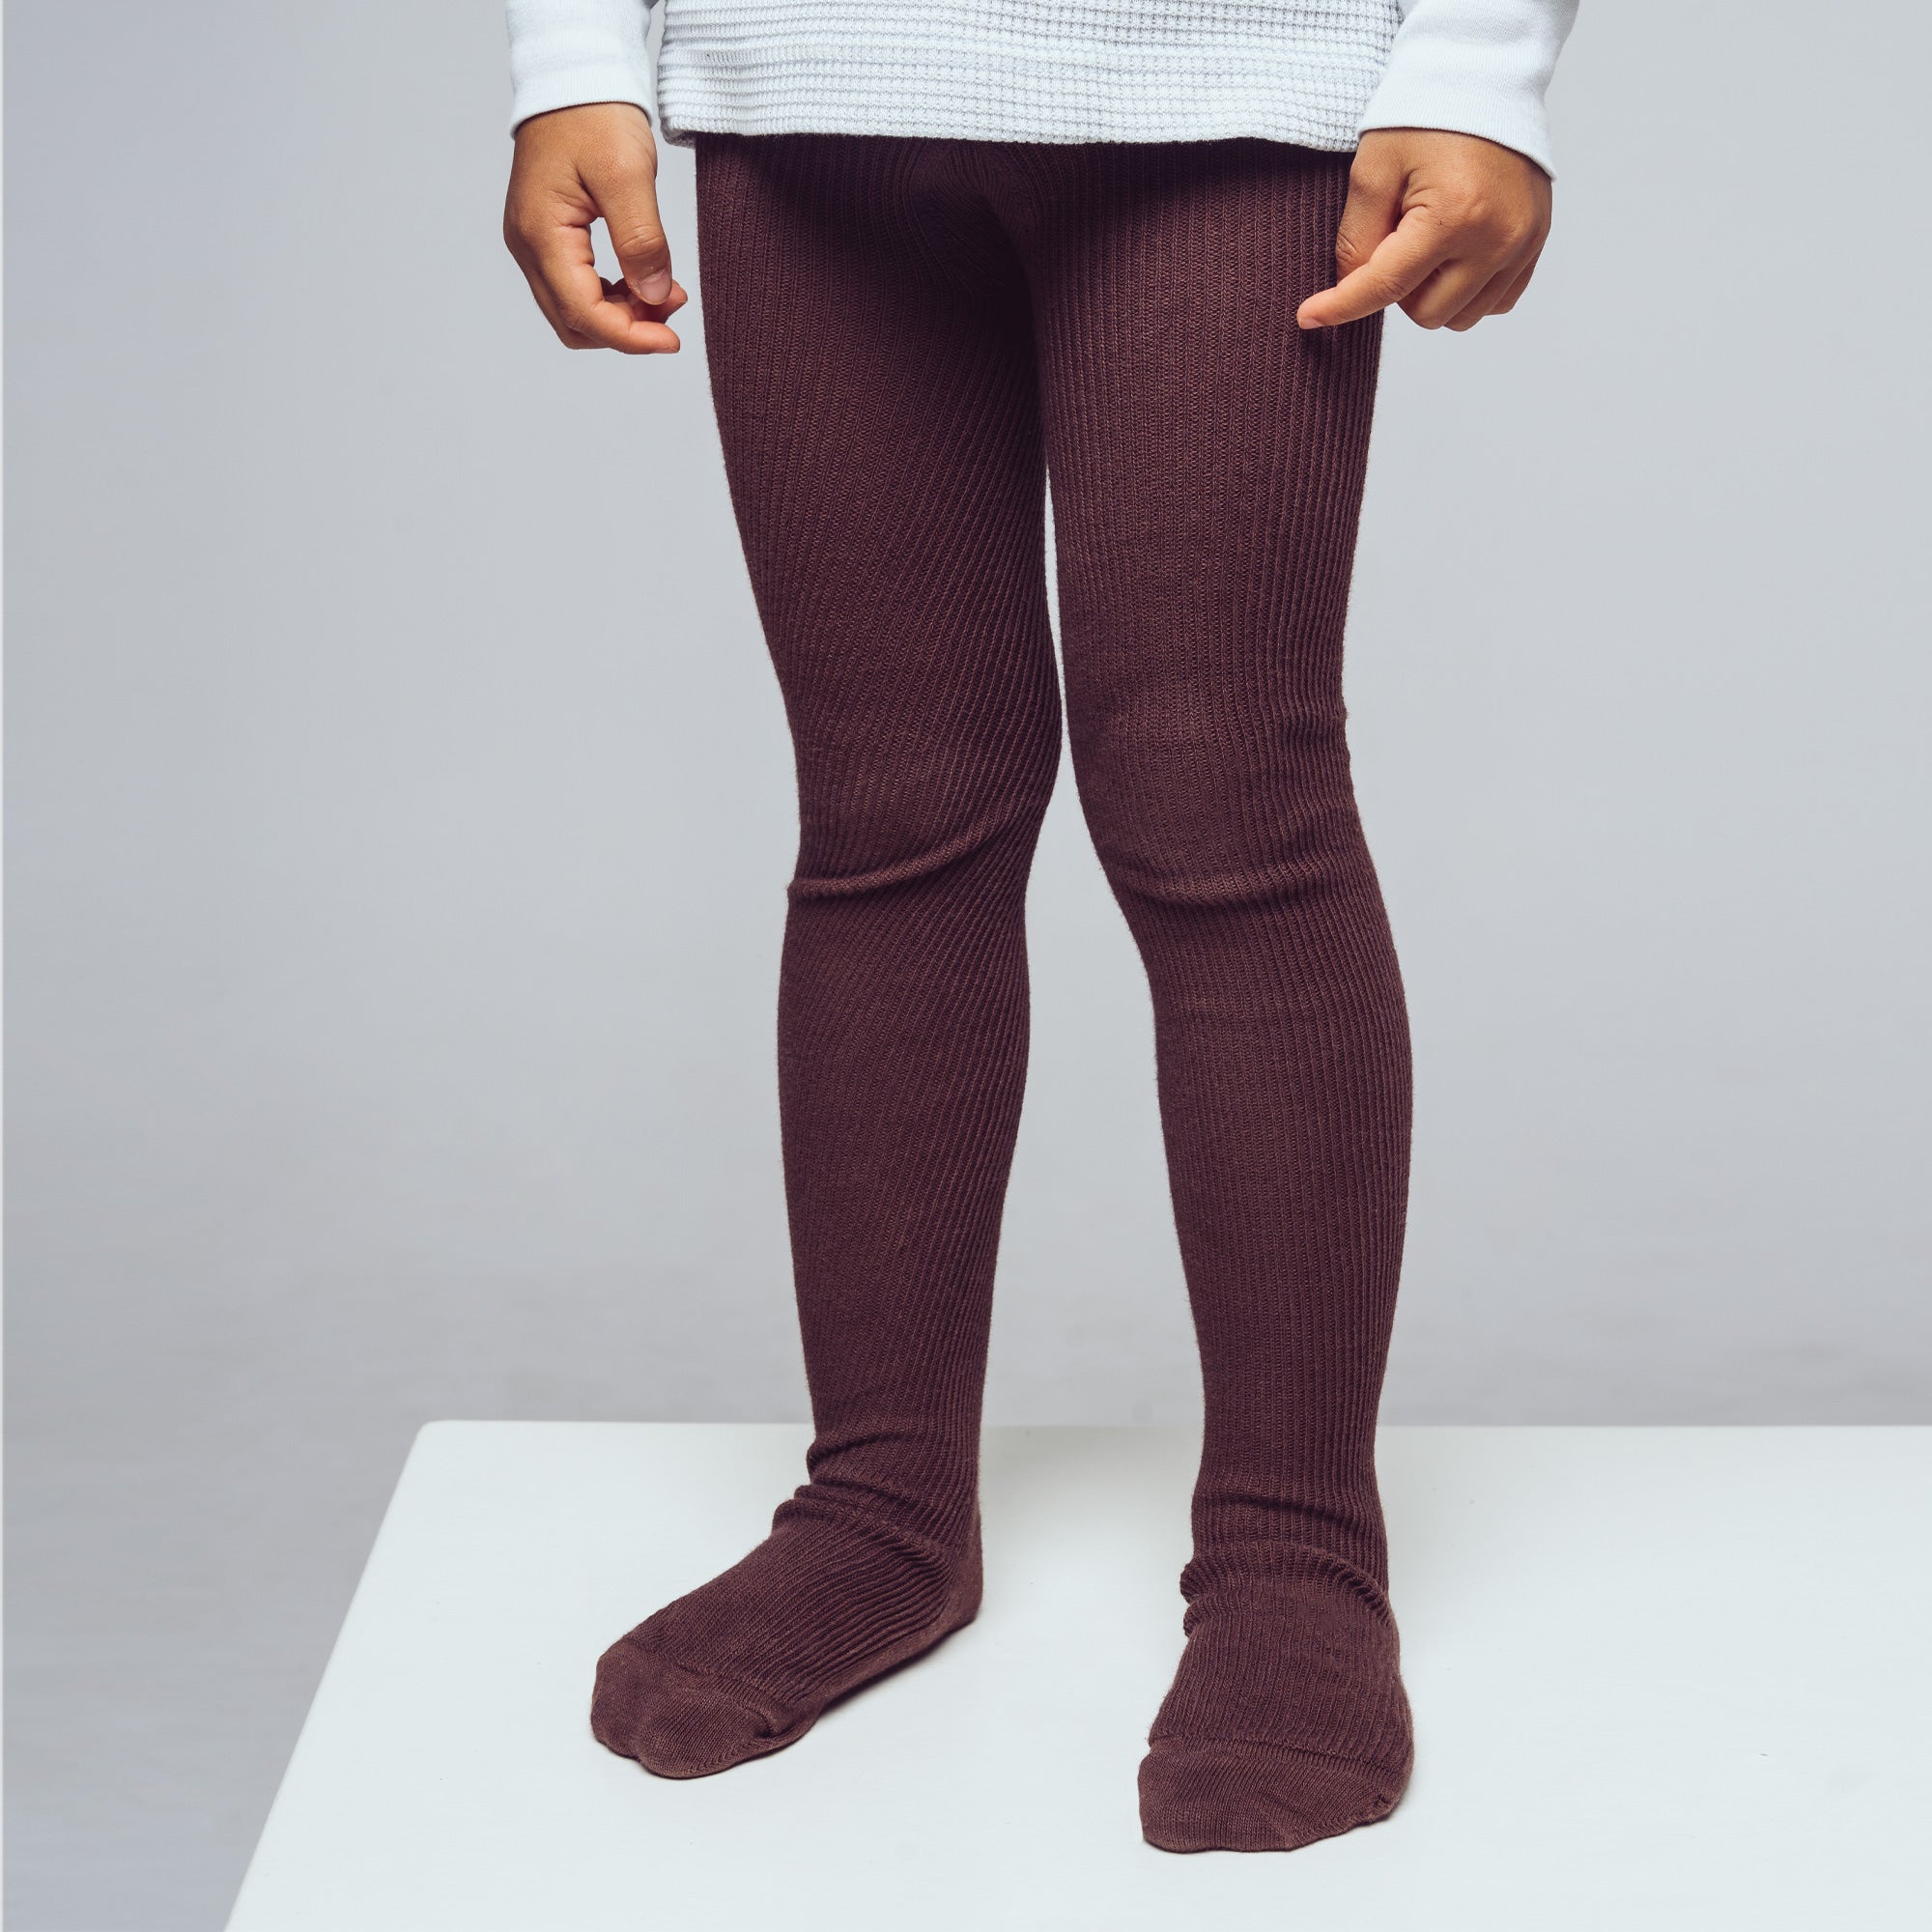 Tights - Chocolate Brown